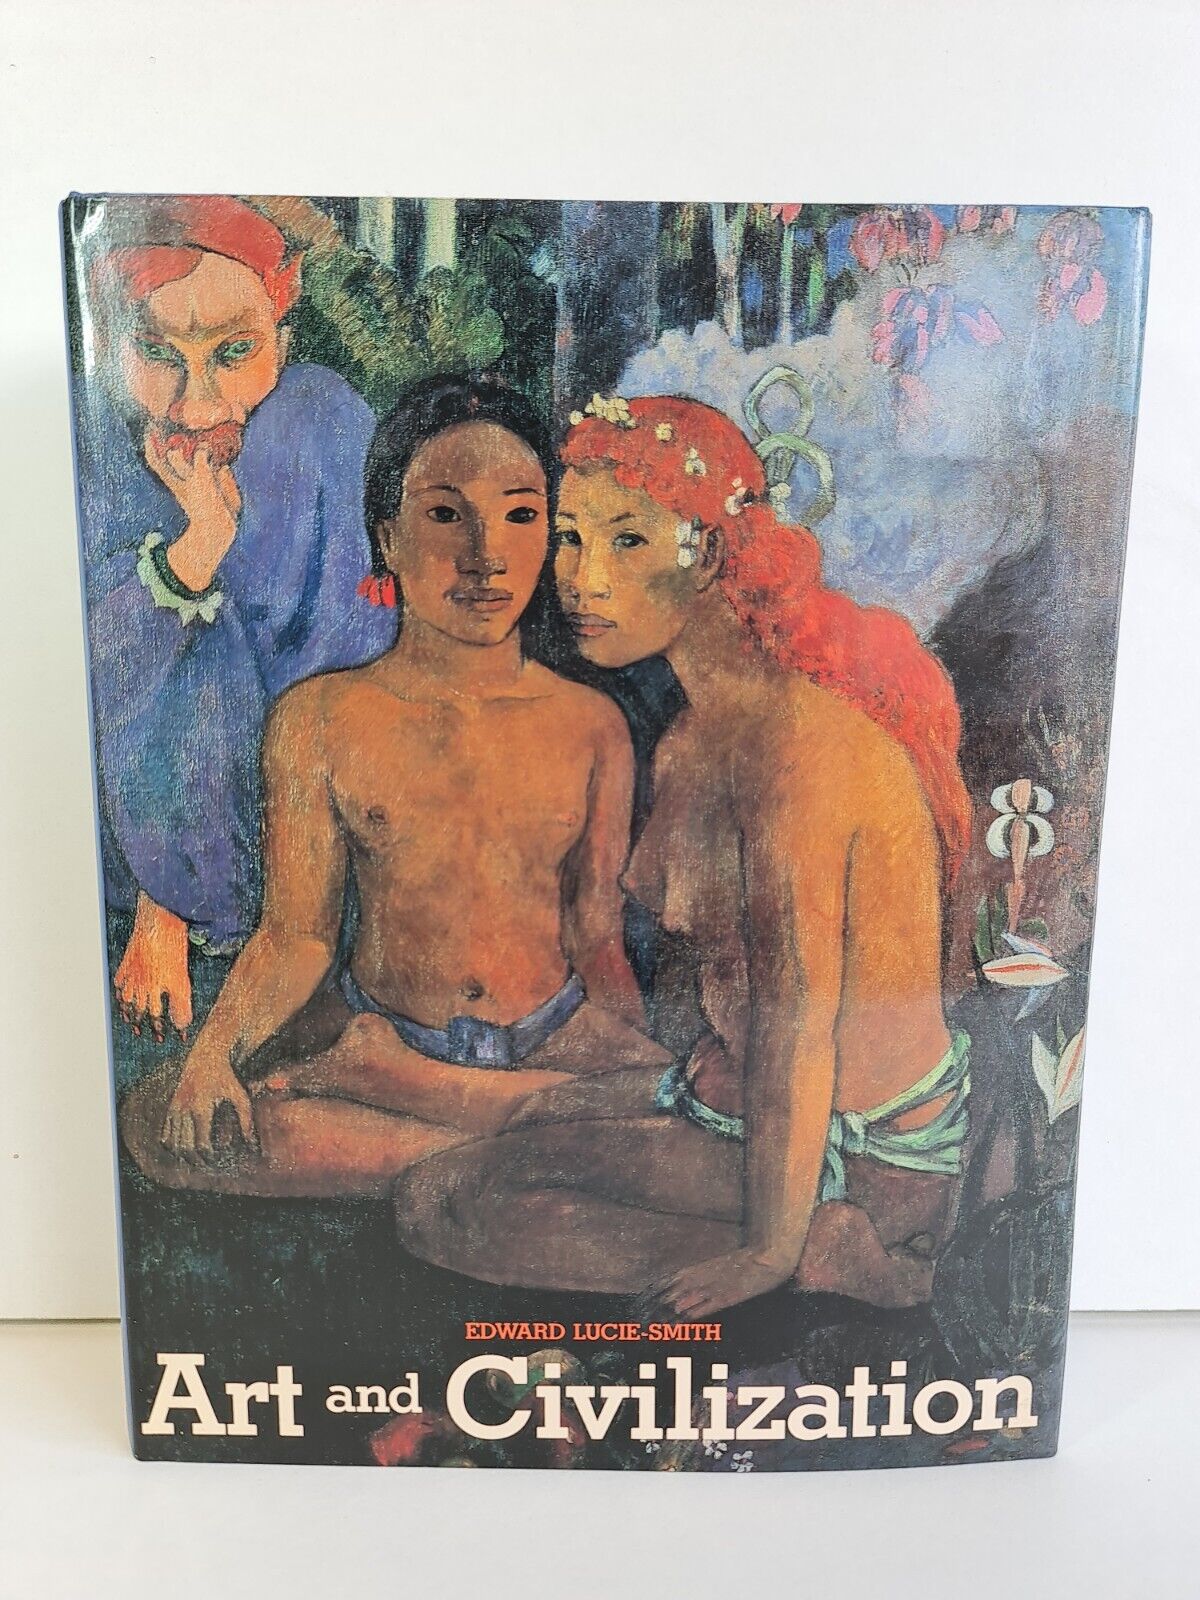 Art and Civilization by Edward Lucie-Smith